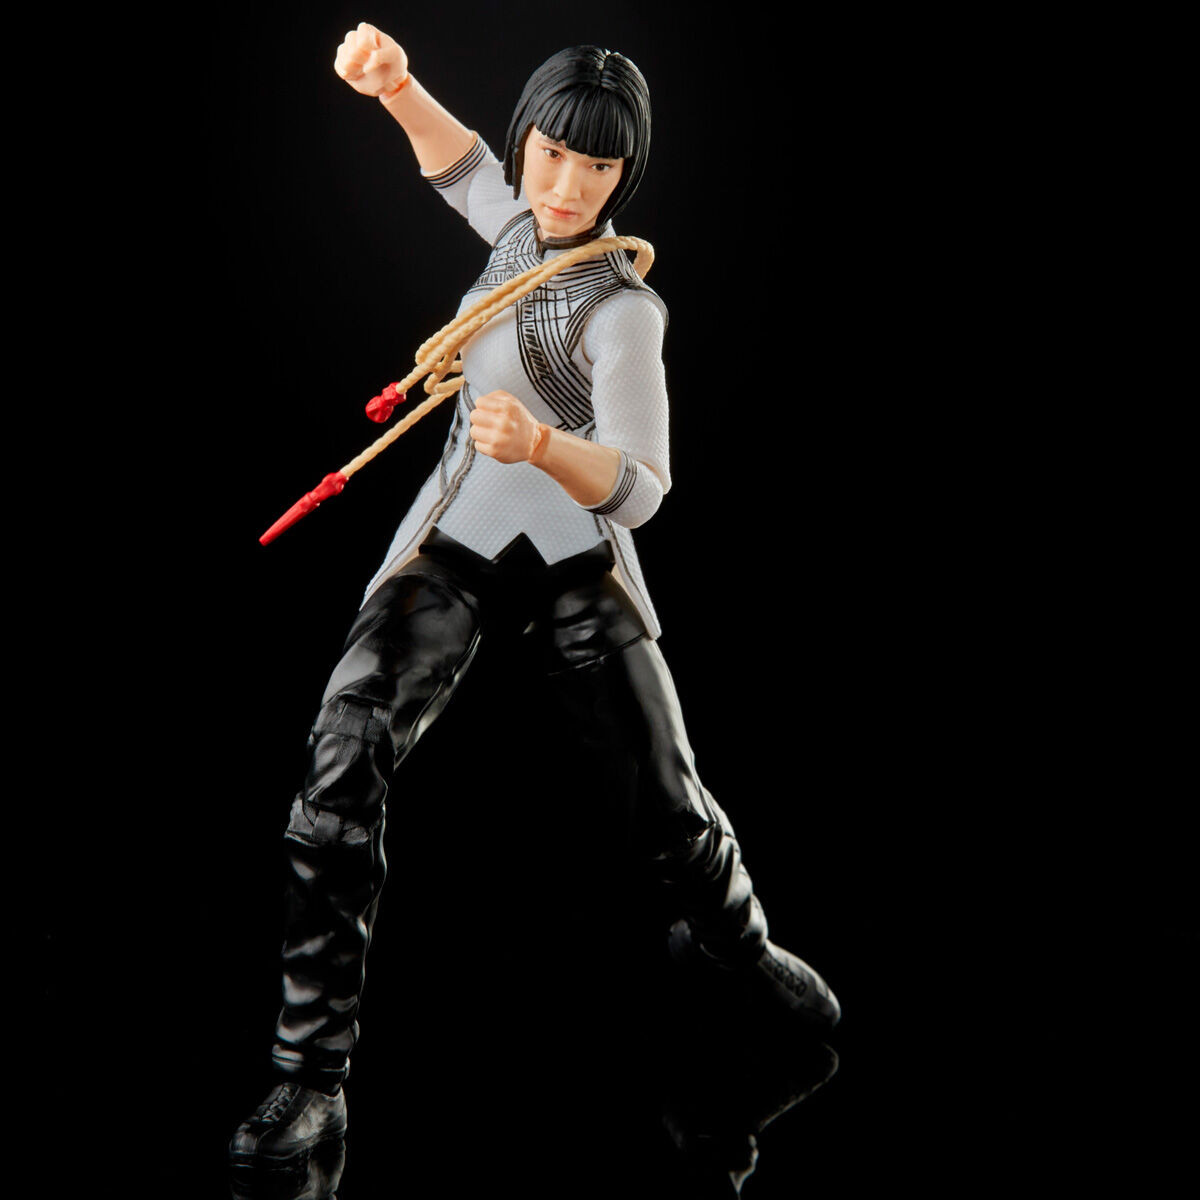 Figura Xialing Shang-Chi and the Legend of the Ten Rings Marvel 15cm HASBRO - 4